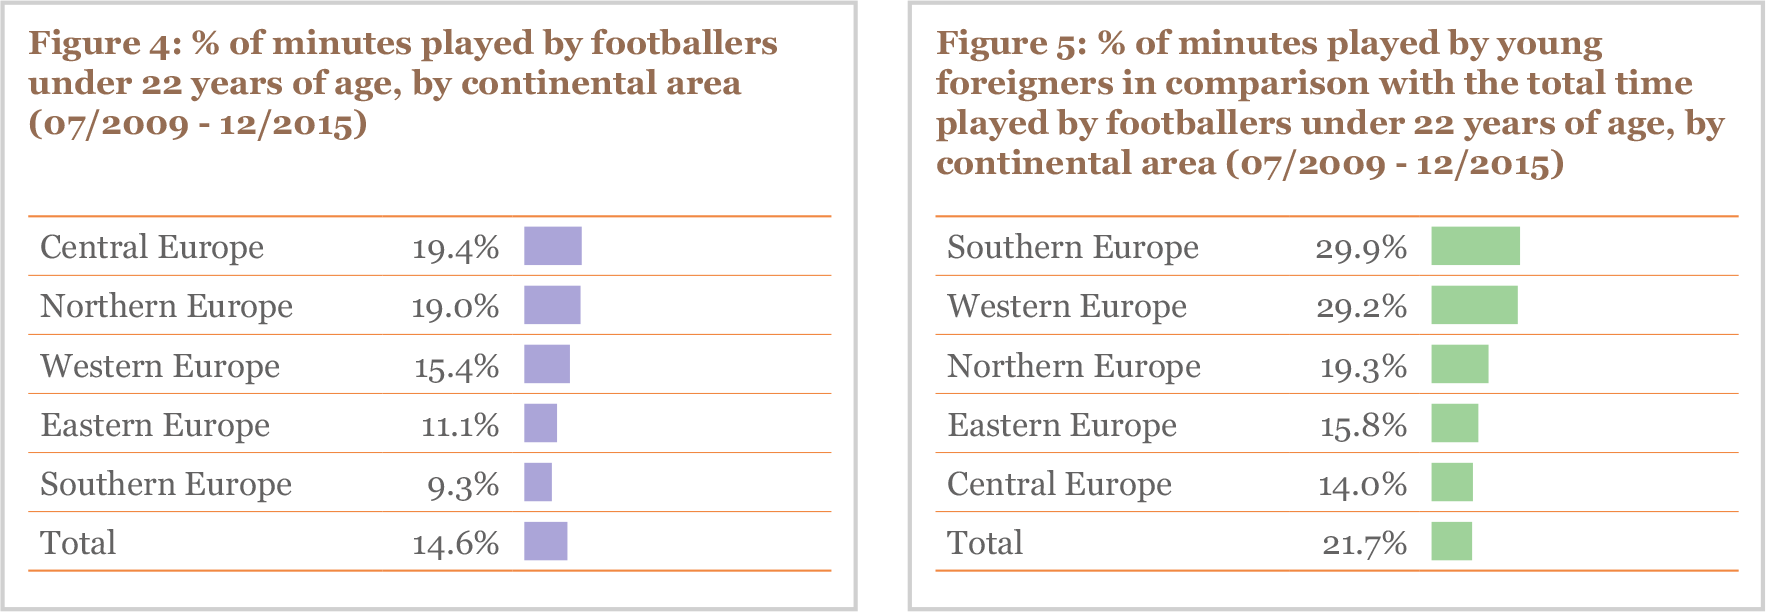 % of minutes played by footballers under 22 years of age, by continental area (07/2009 - 12/2015)